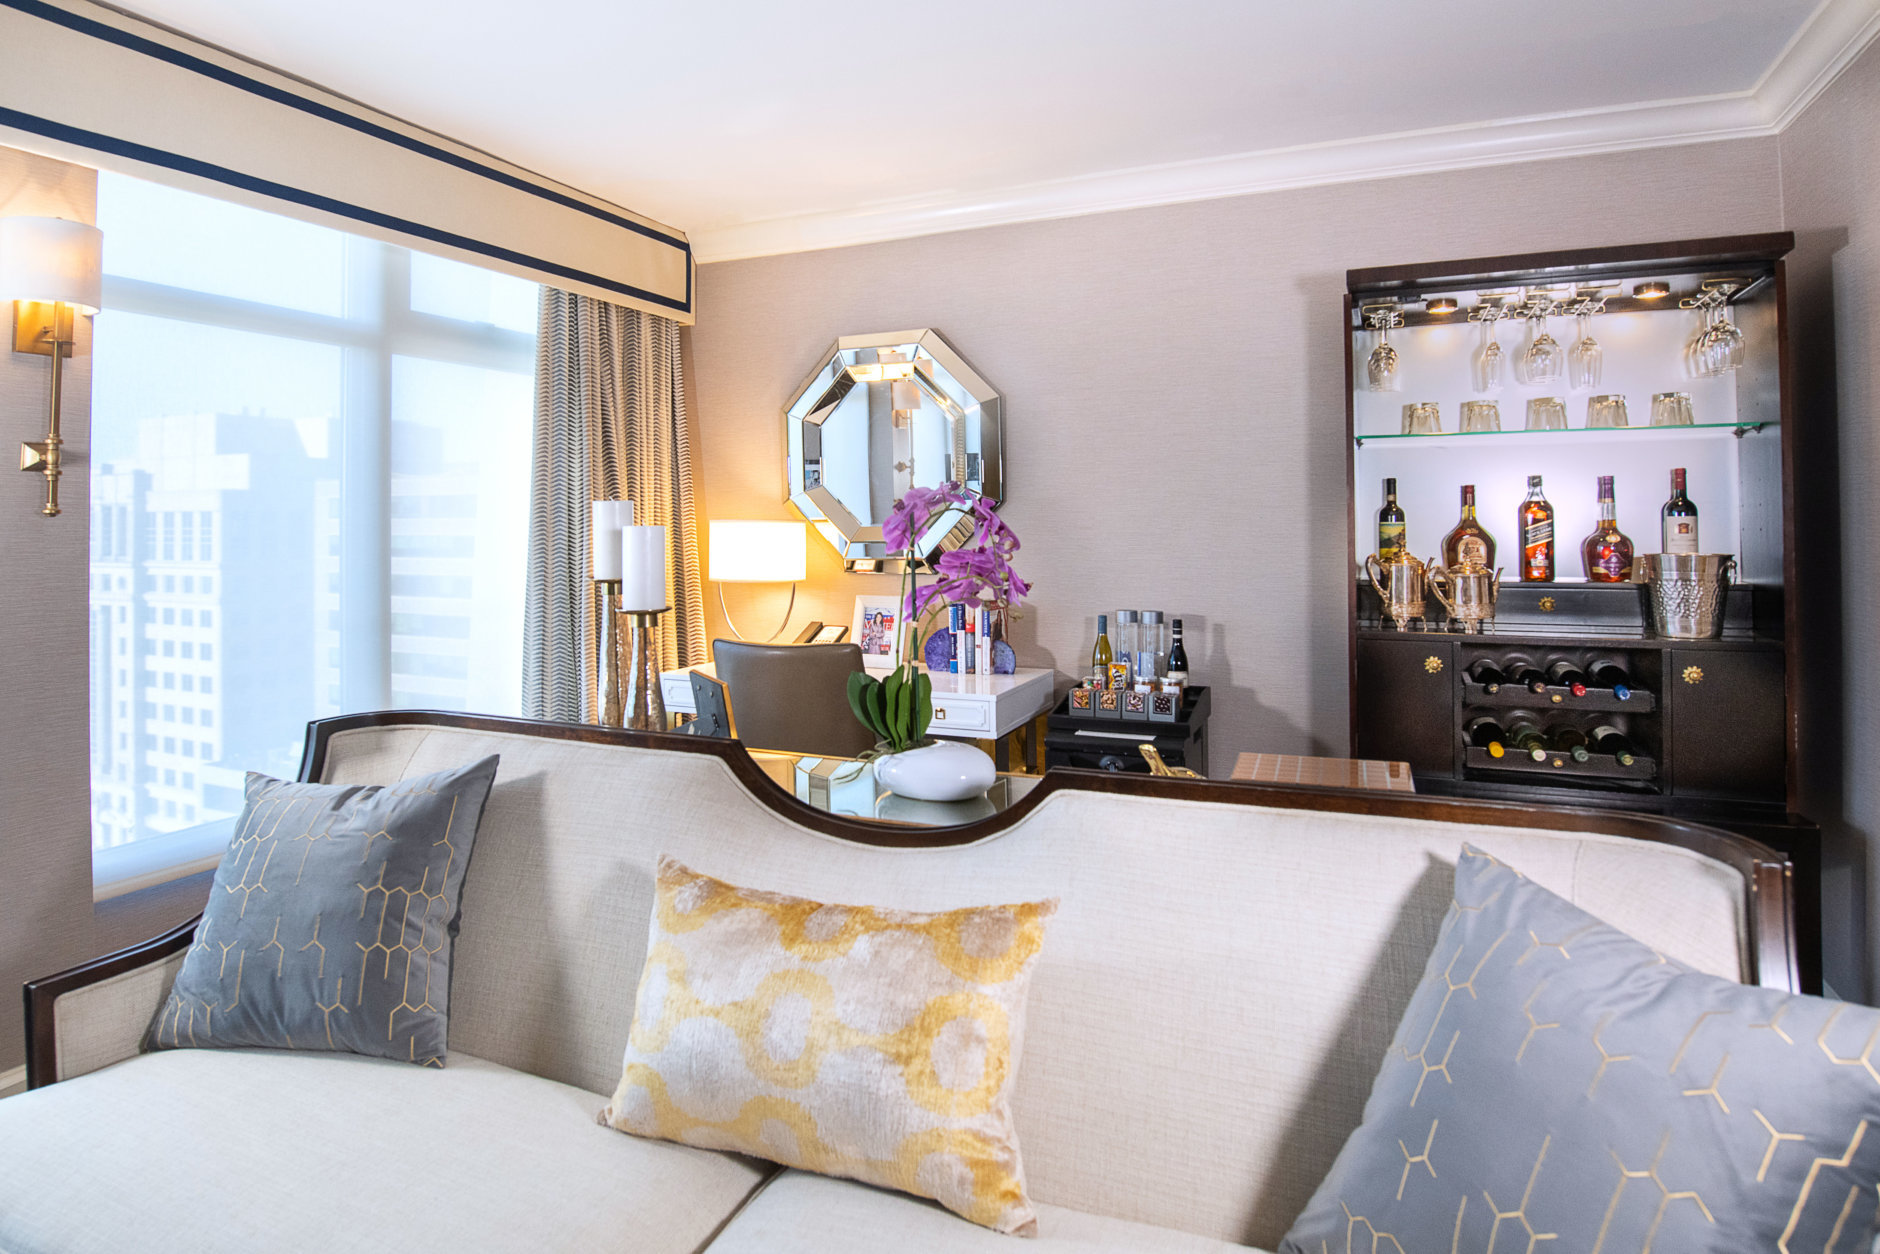 For uber-fans who want the ultimate "Veep" experience at the Hamilton, a one-bedroom suite on the 12th floor is now the Selina Meyer Presidential Suite, with set props and mementos from the fictional president’s brownstone home. (Courtesy Hamilton Hotel)